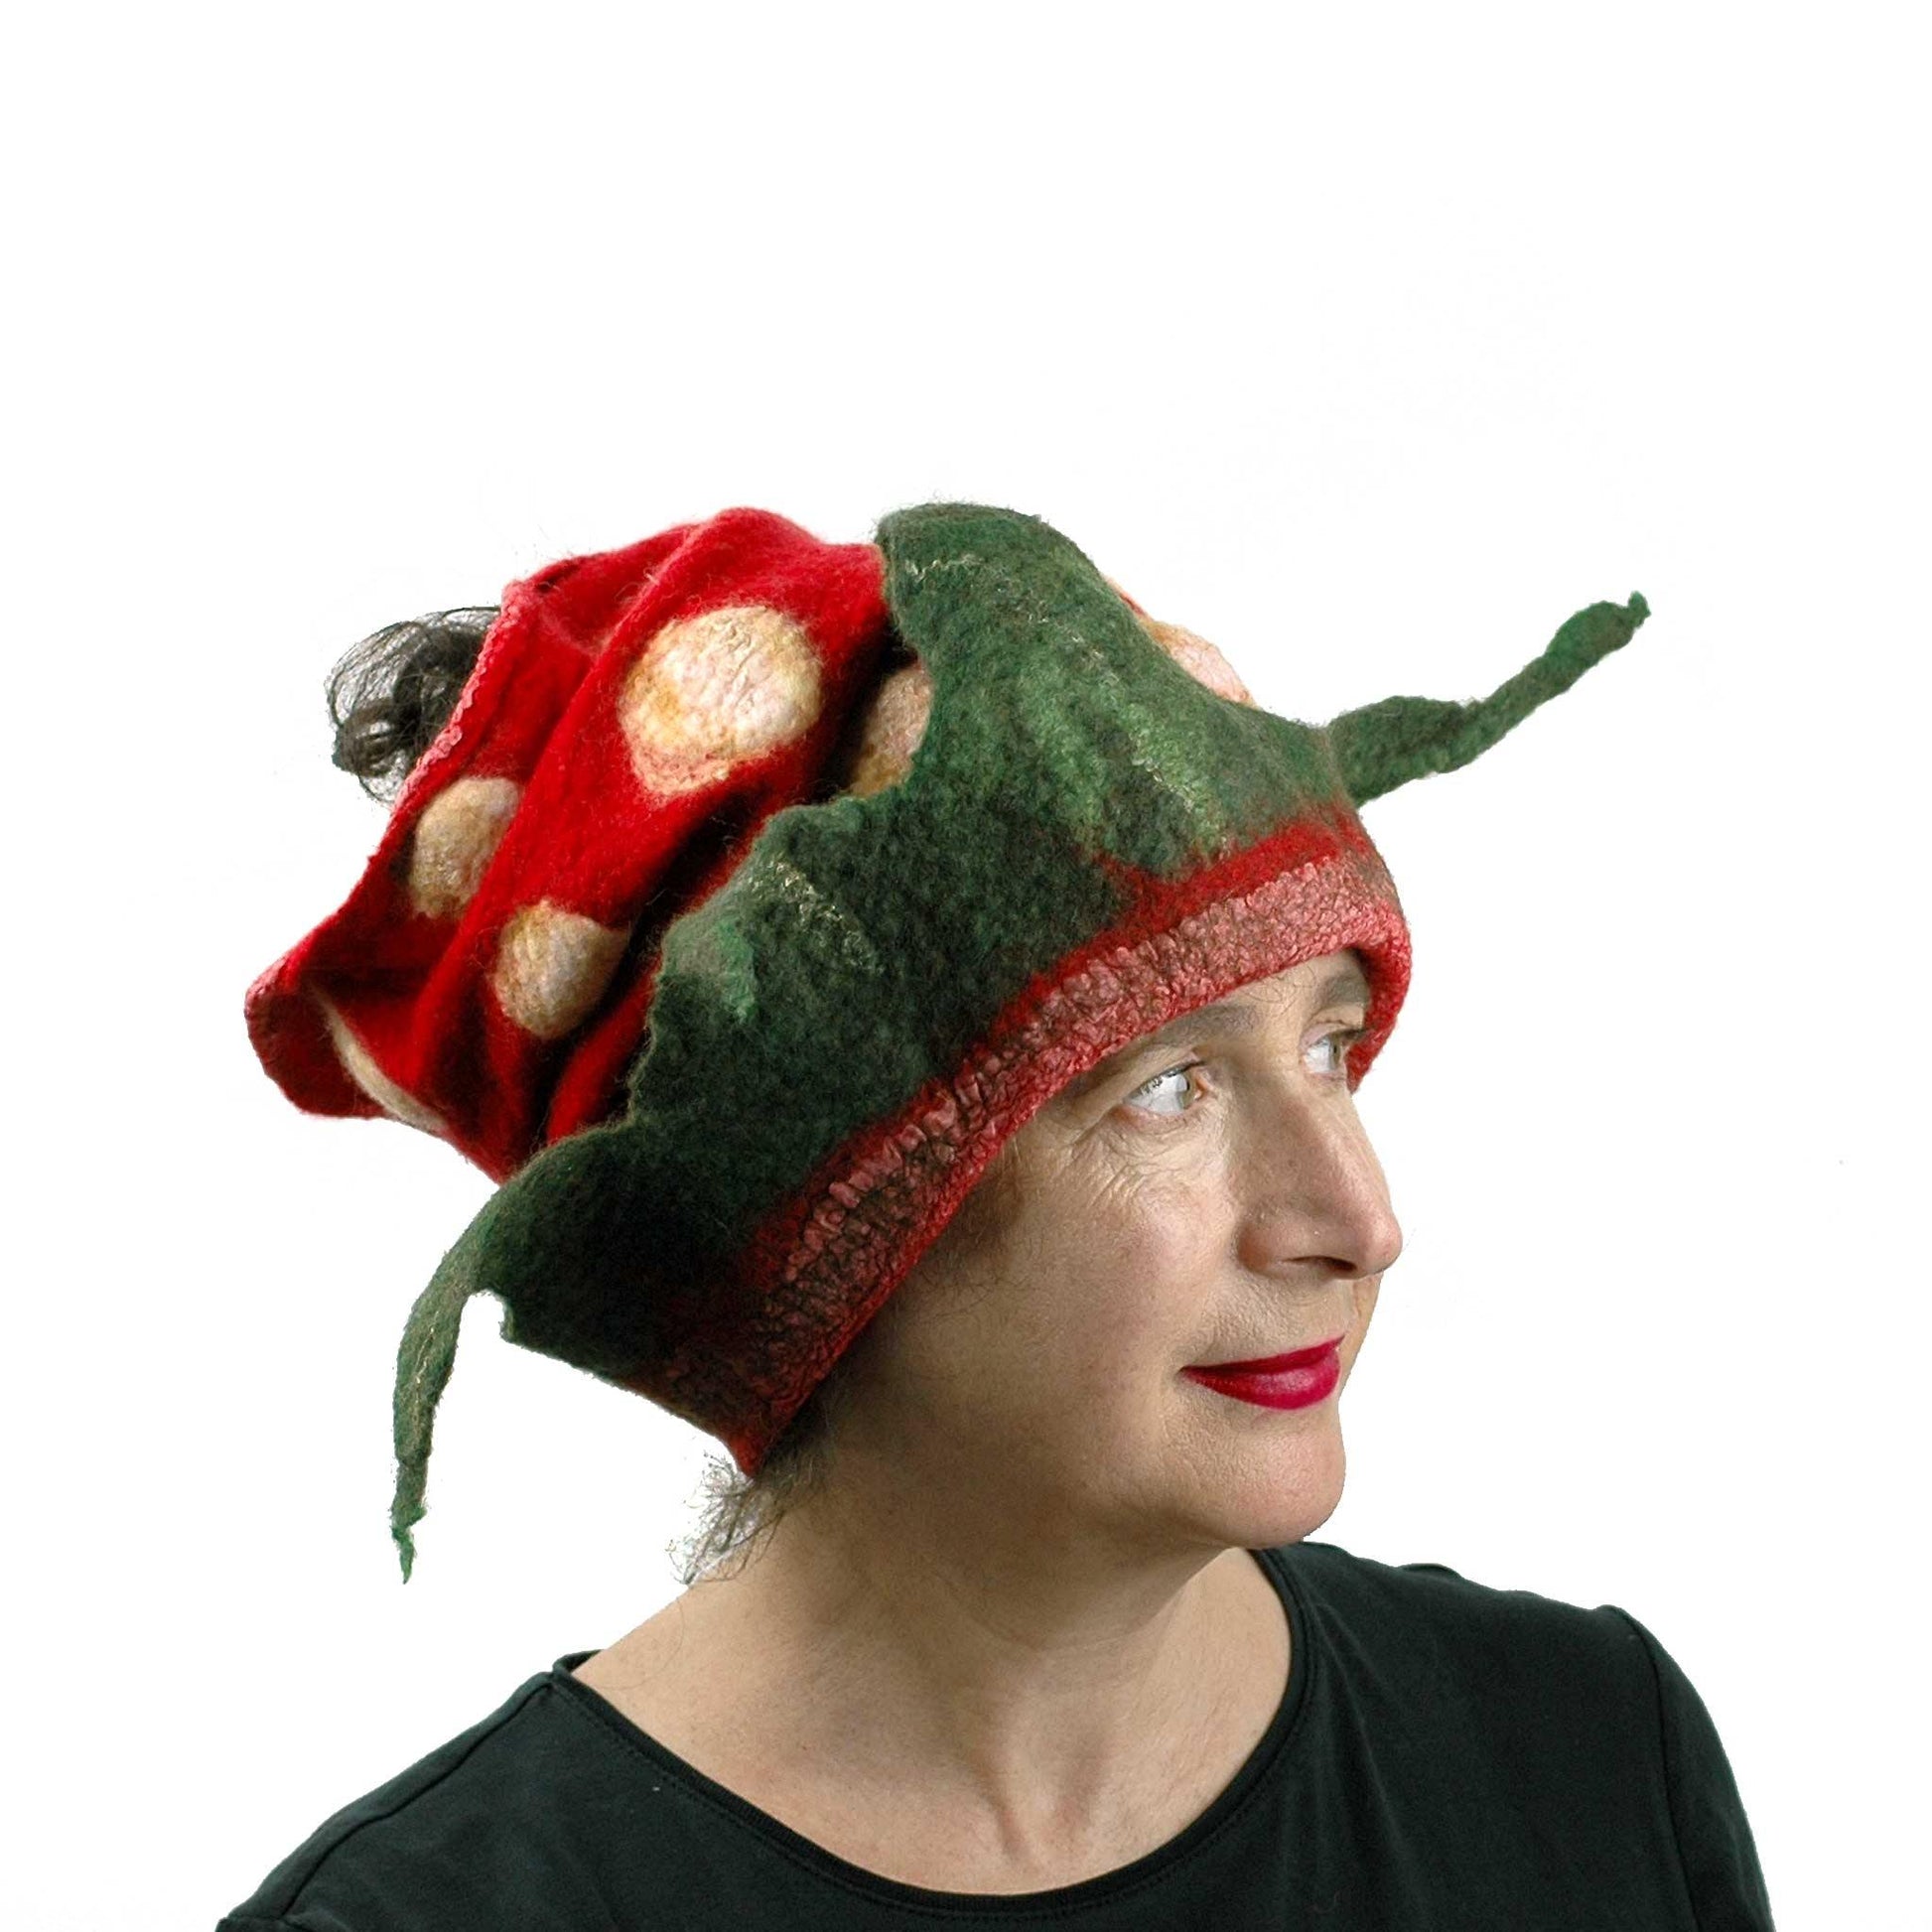 Nunofelted Strawberry Neck Warmer Headscarf  worn with leaves folded back on head.